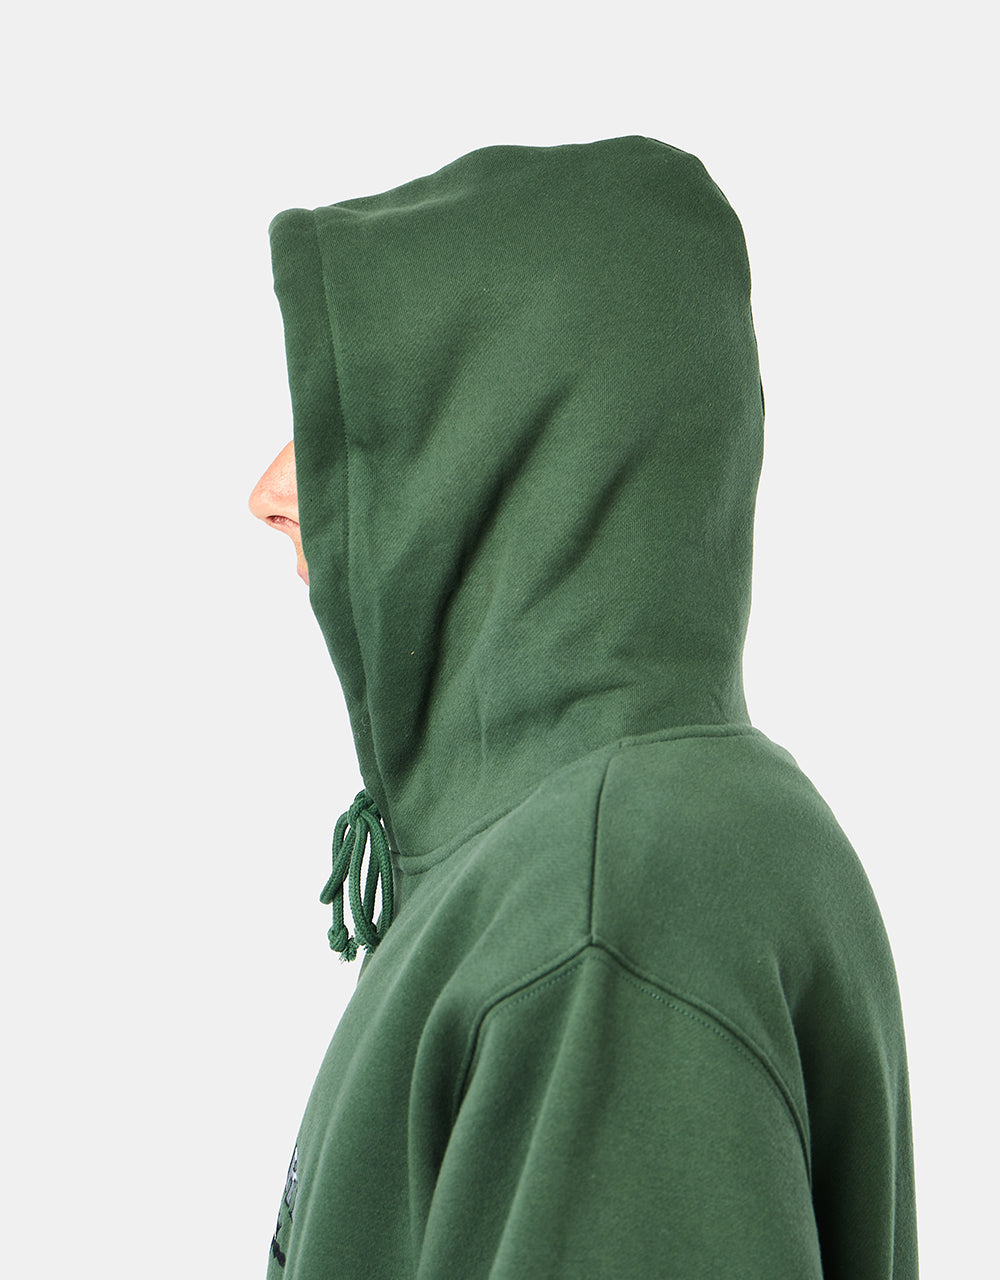 Pass Port Thistle Embroidered Pullover Hoodie - Forest Green